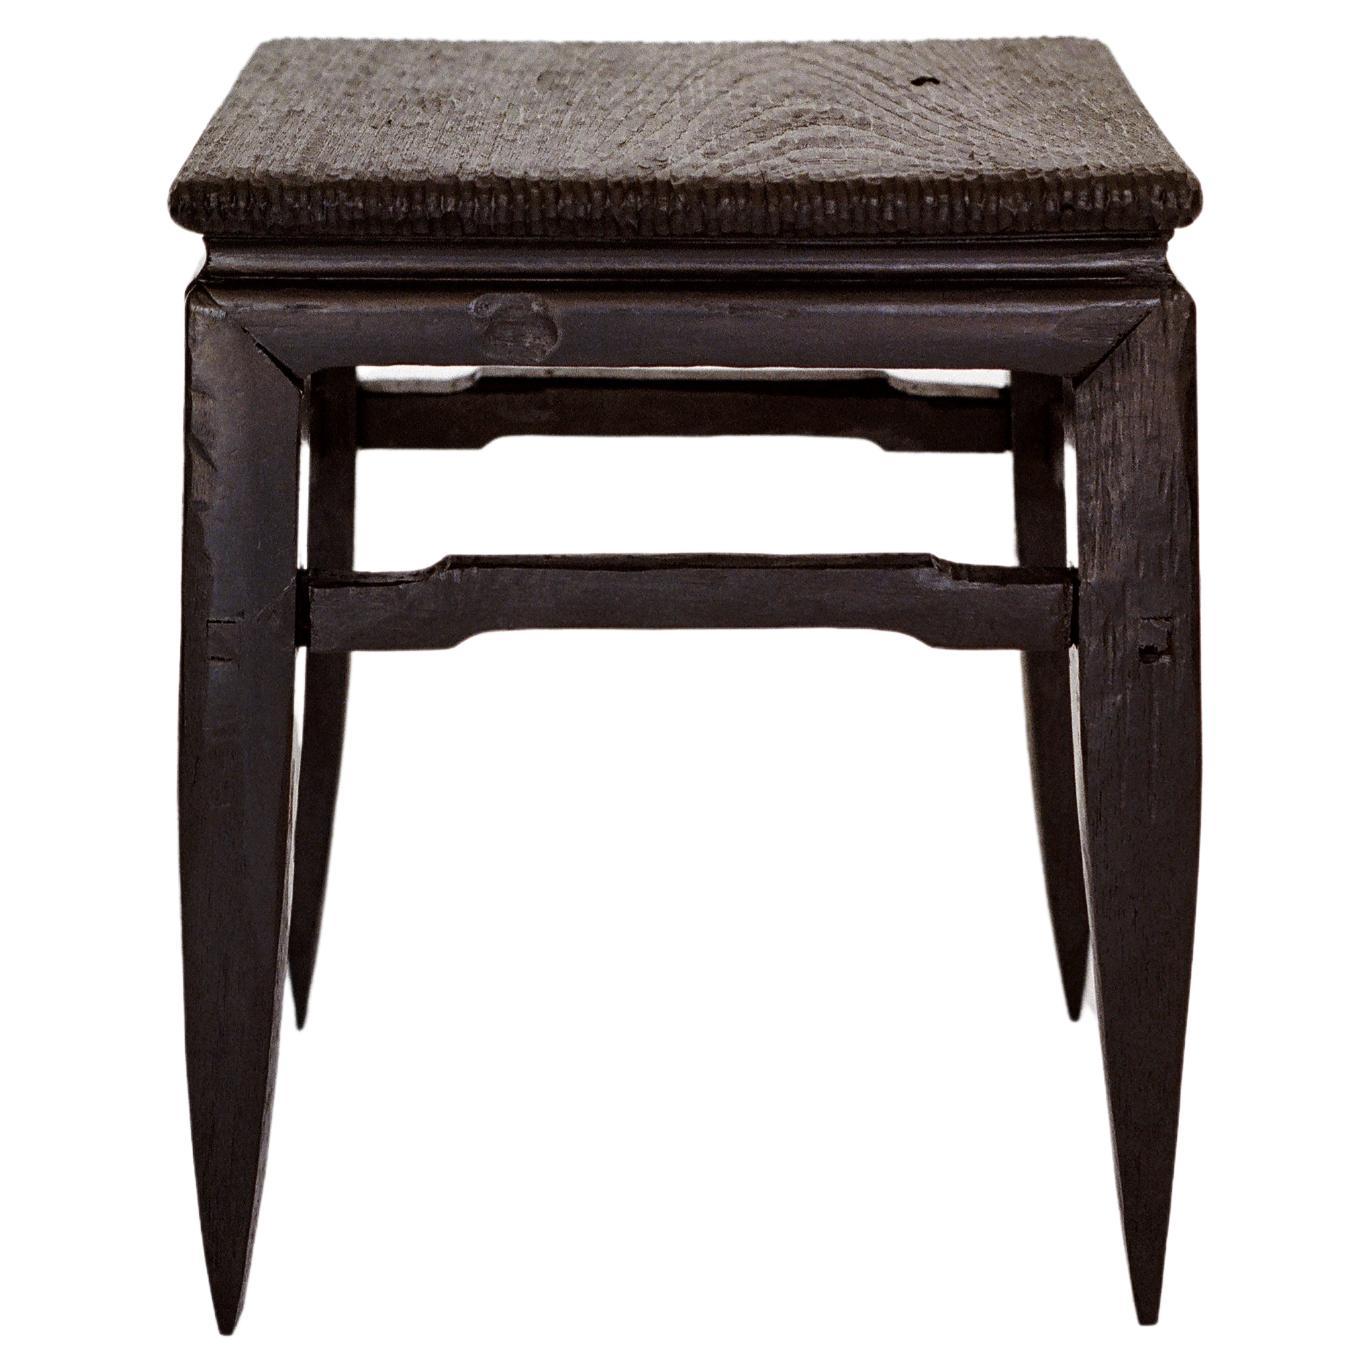 Found Ming Side Table by Henry D'ath